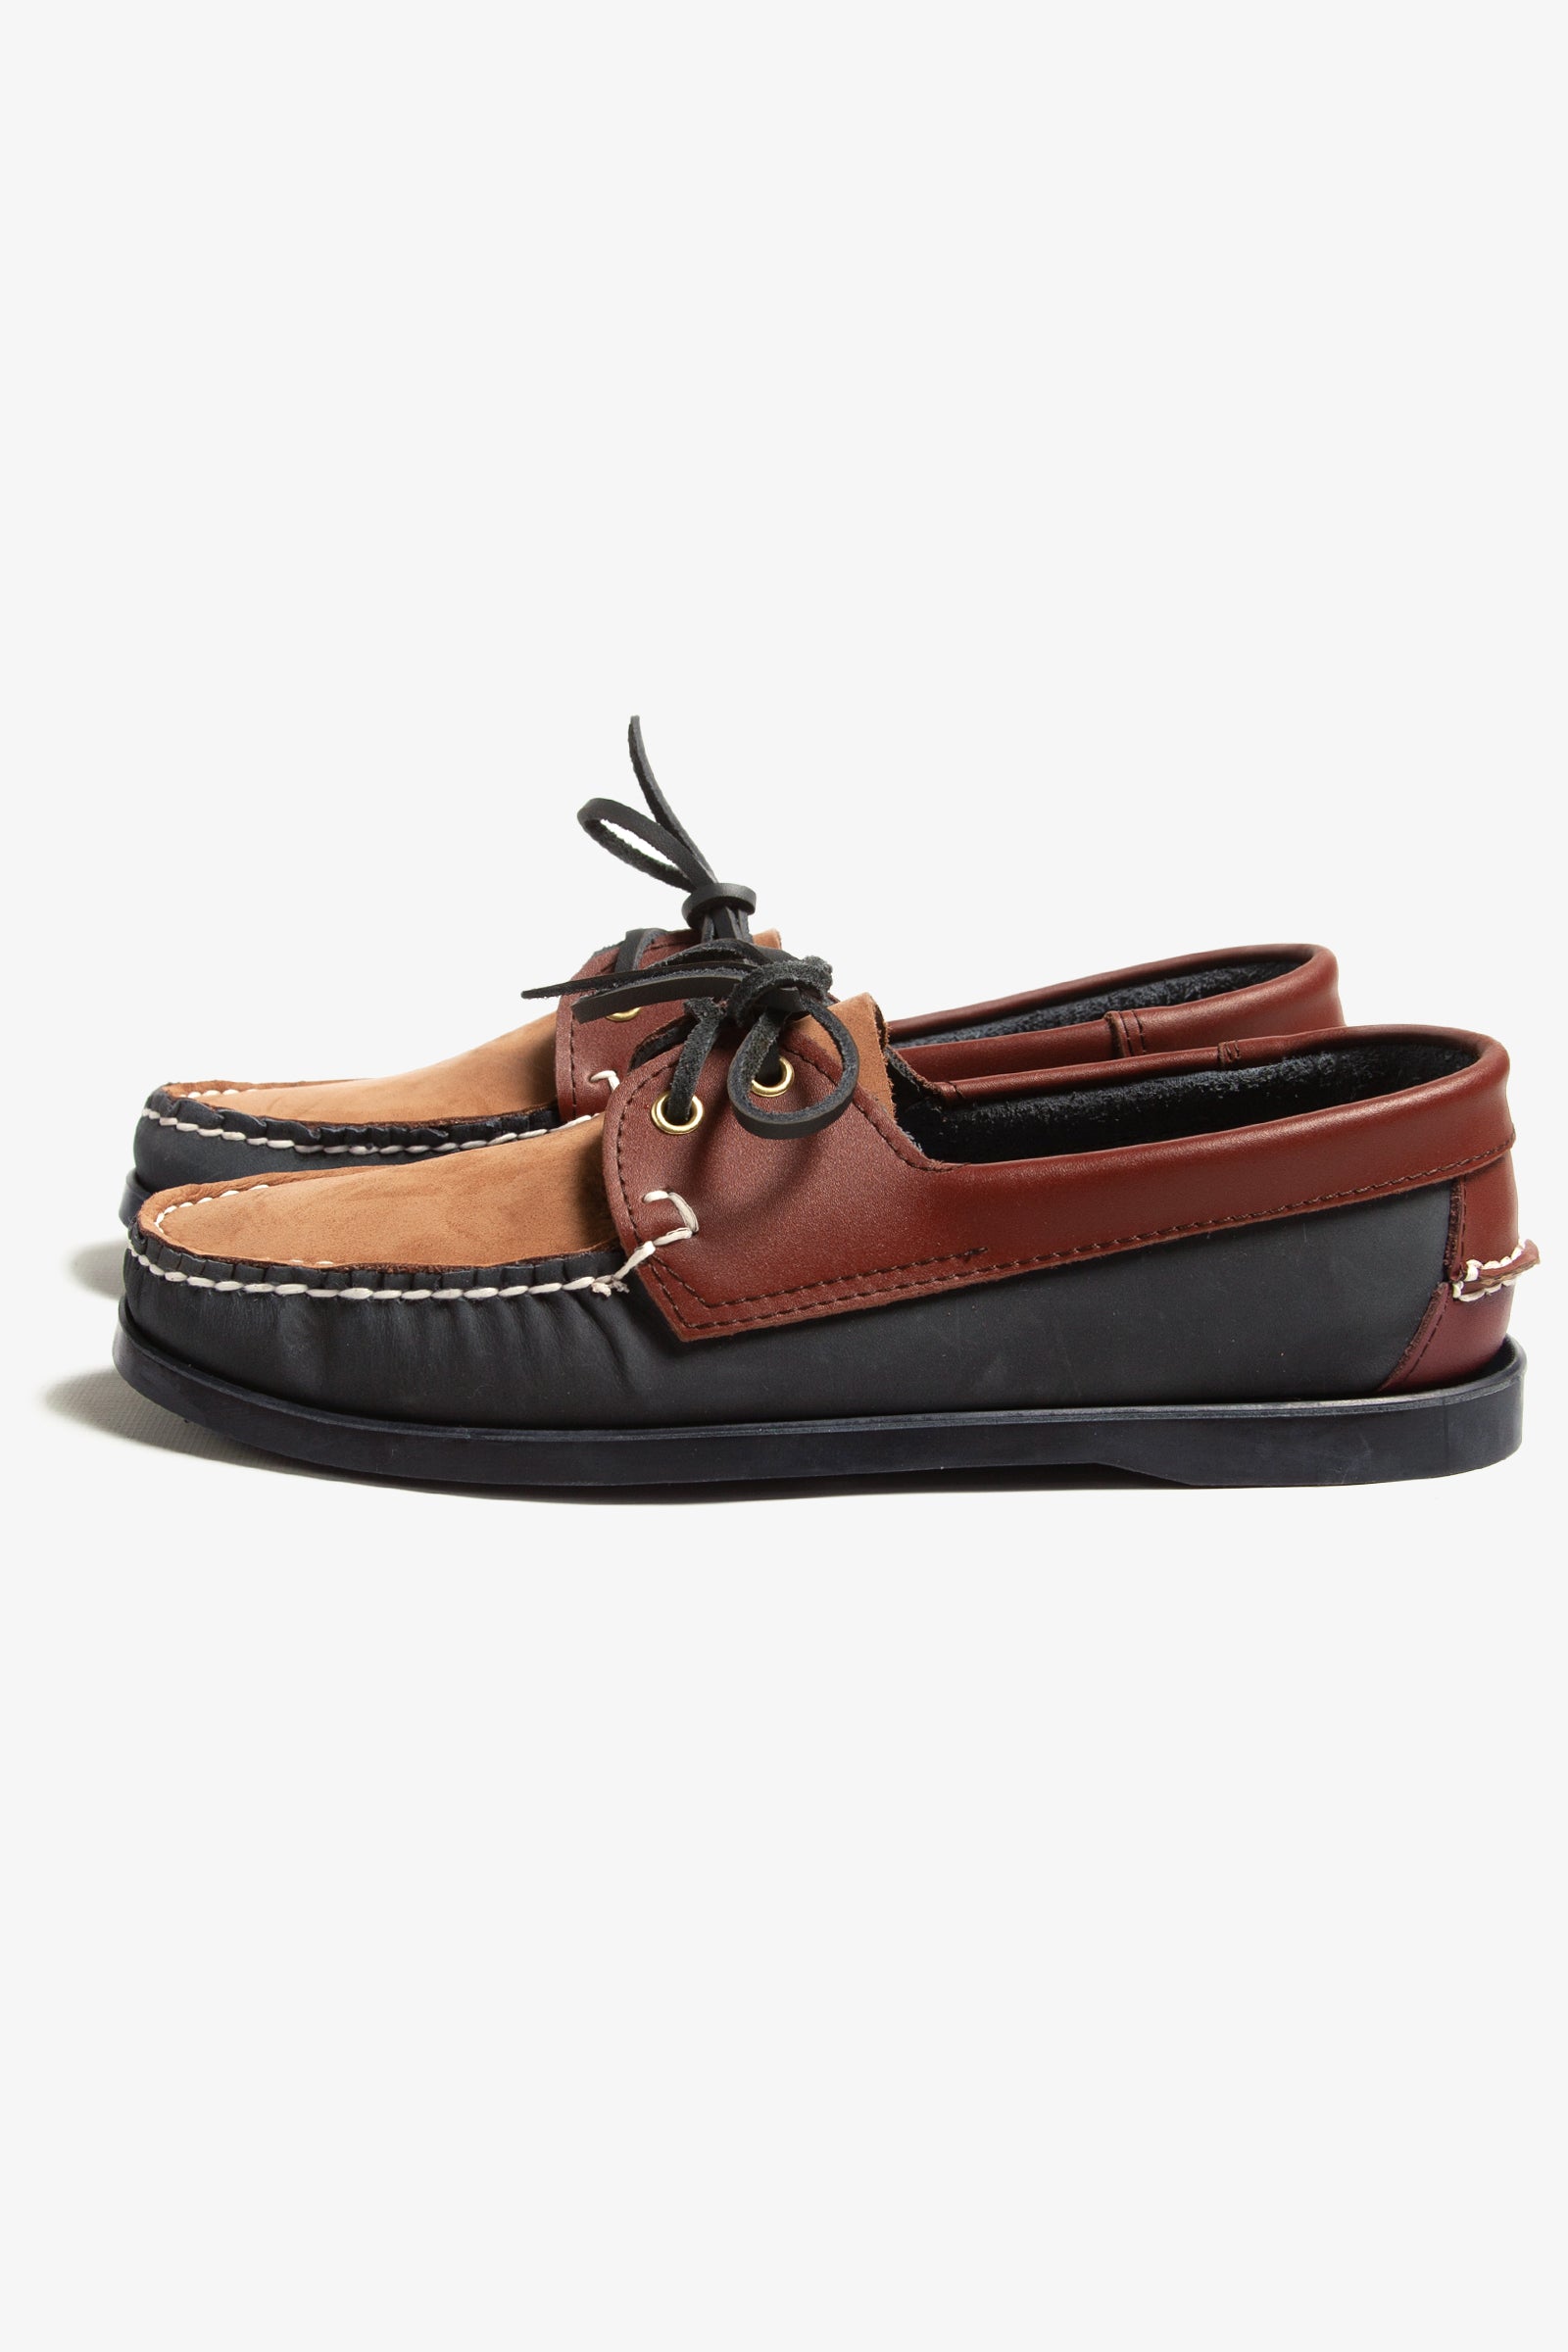 Goodcamp - Deck Loafer Shoes - Brown Multi